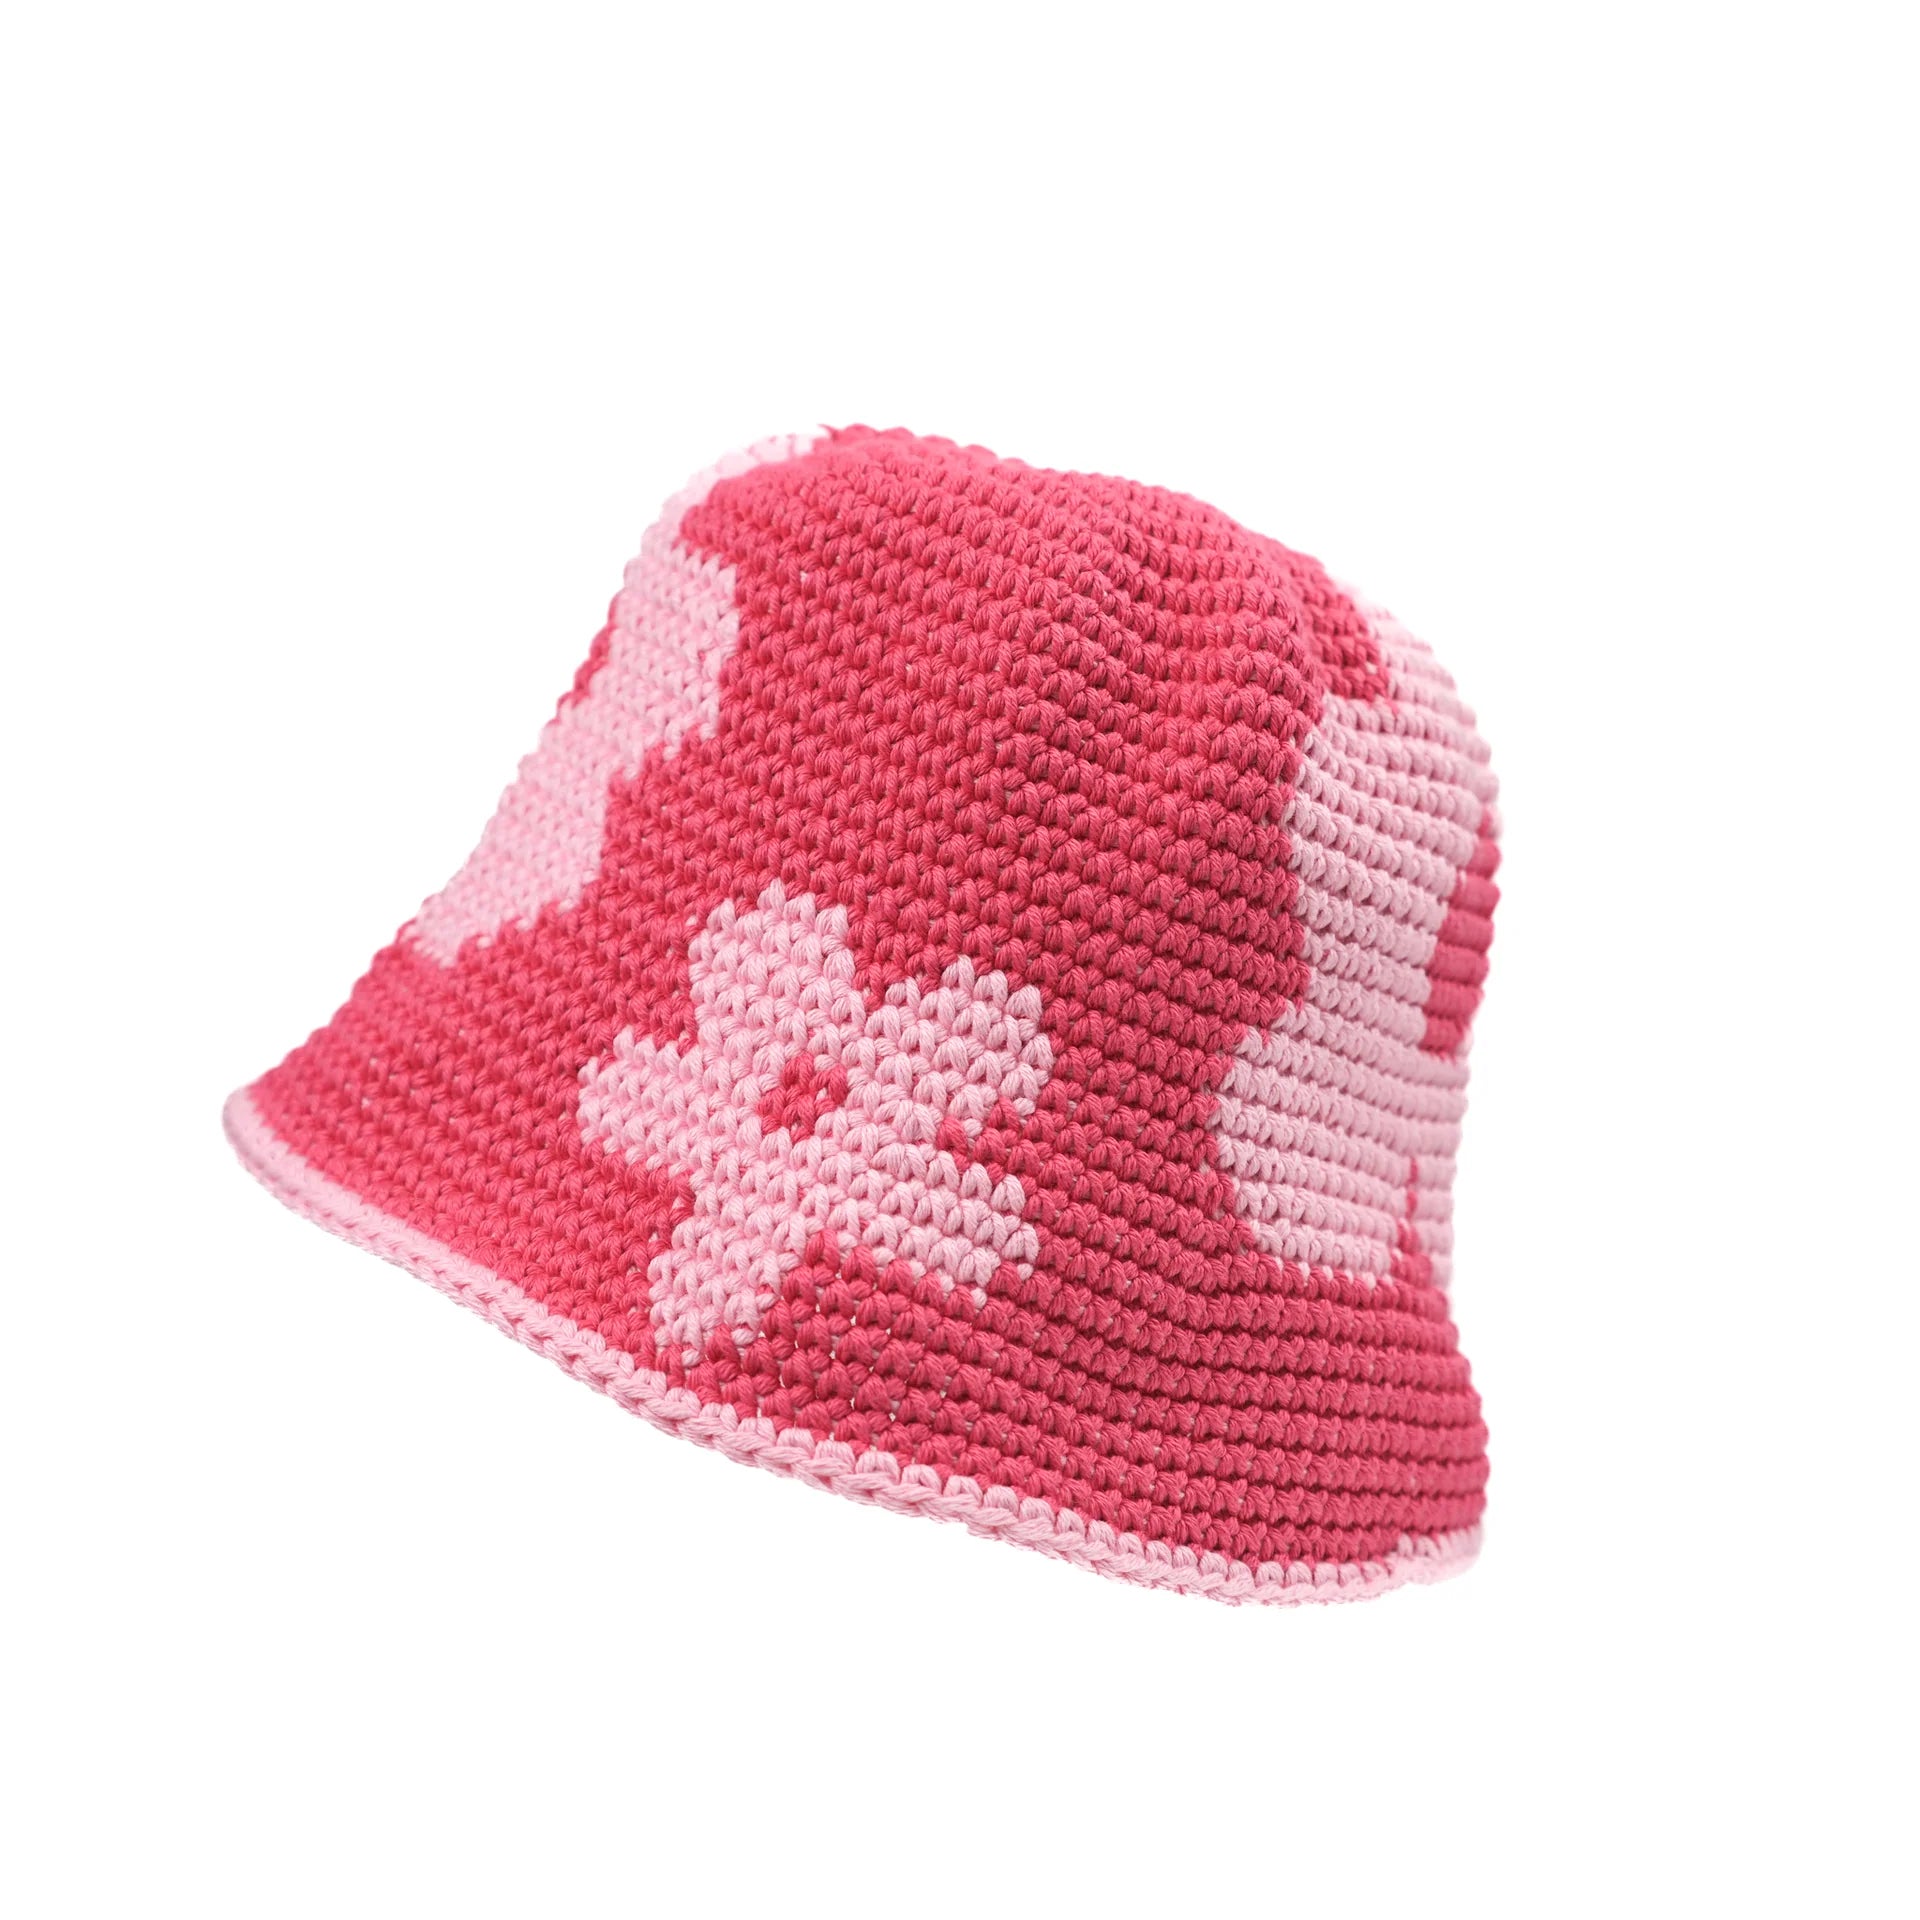 Crochet monochromatic pink bucket hat with graphic floral pattern available at Ease Toronto